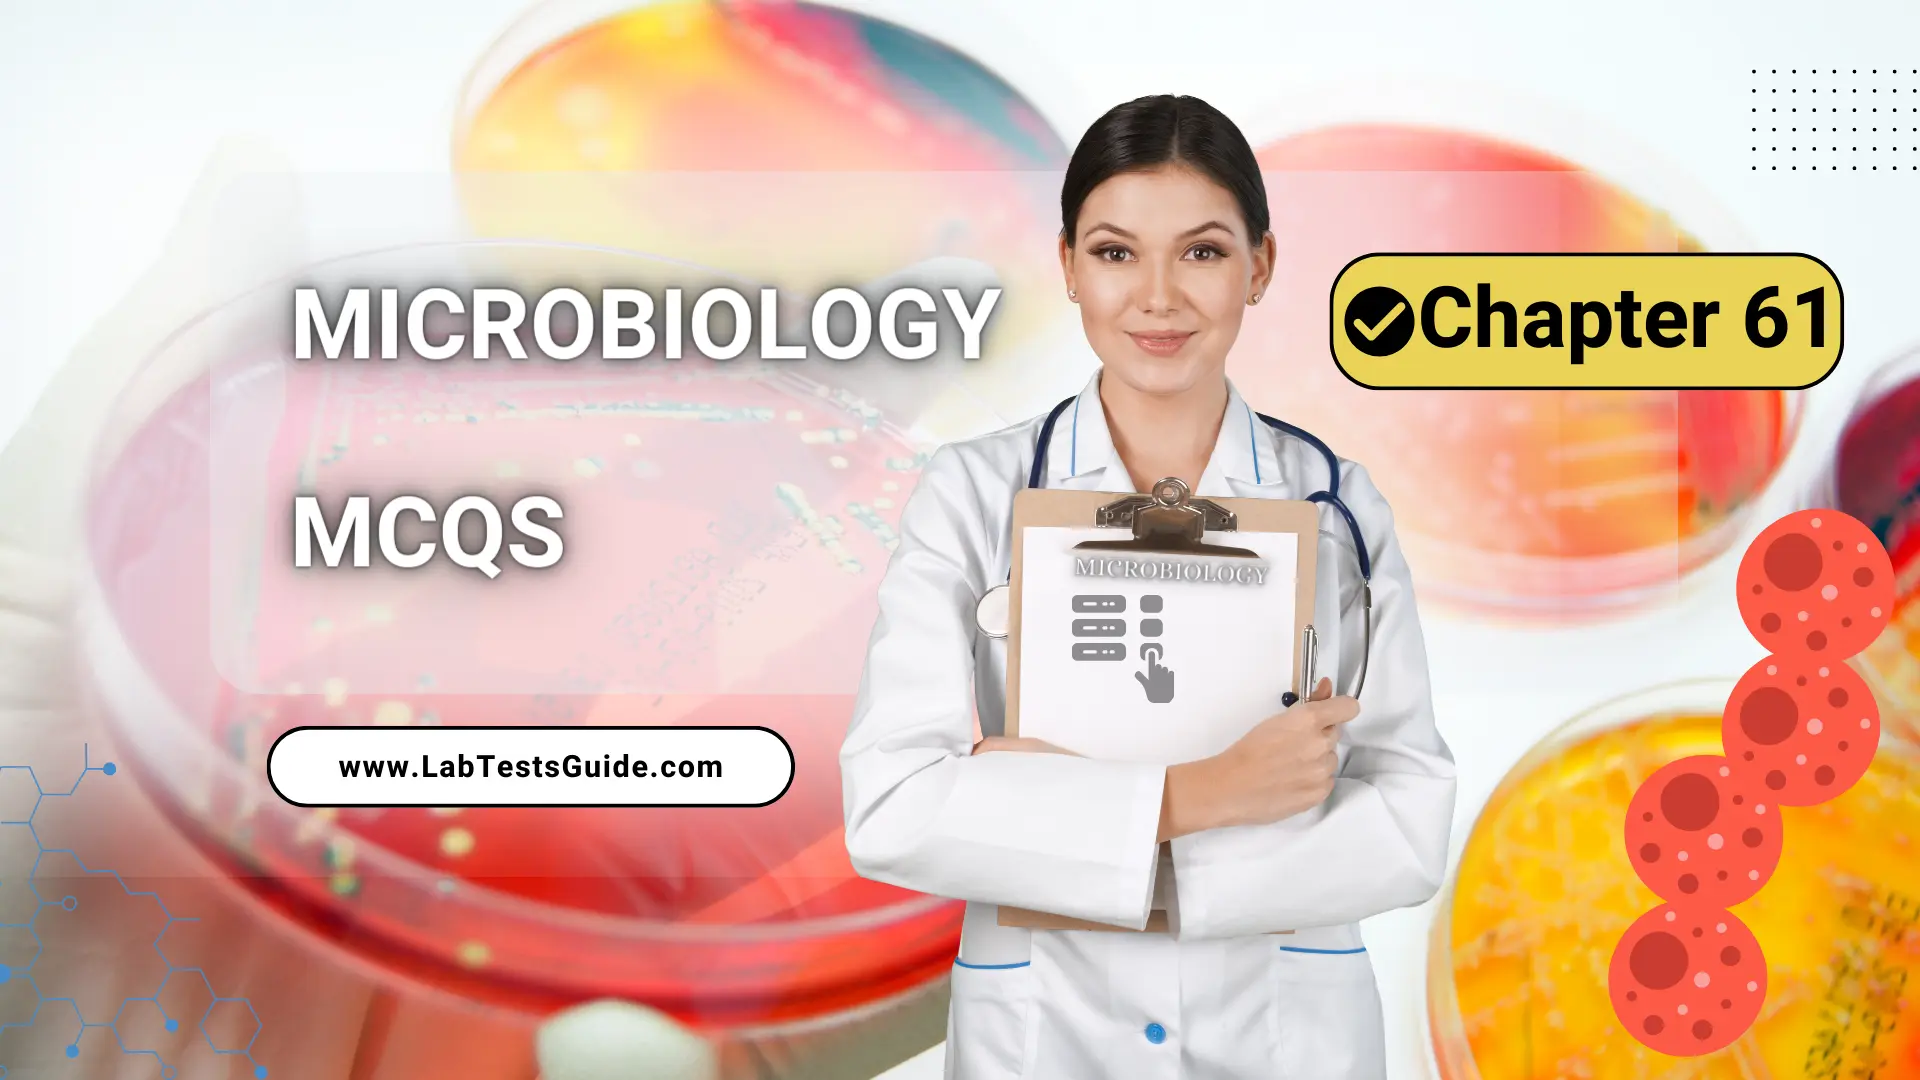 Microbiology MCQs Chapter 61